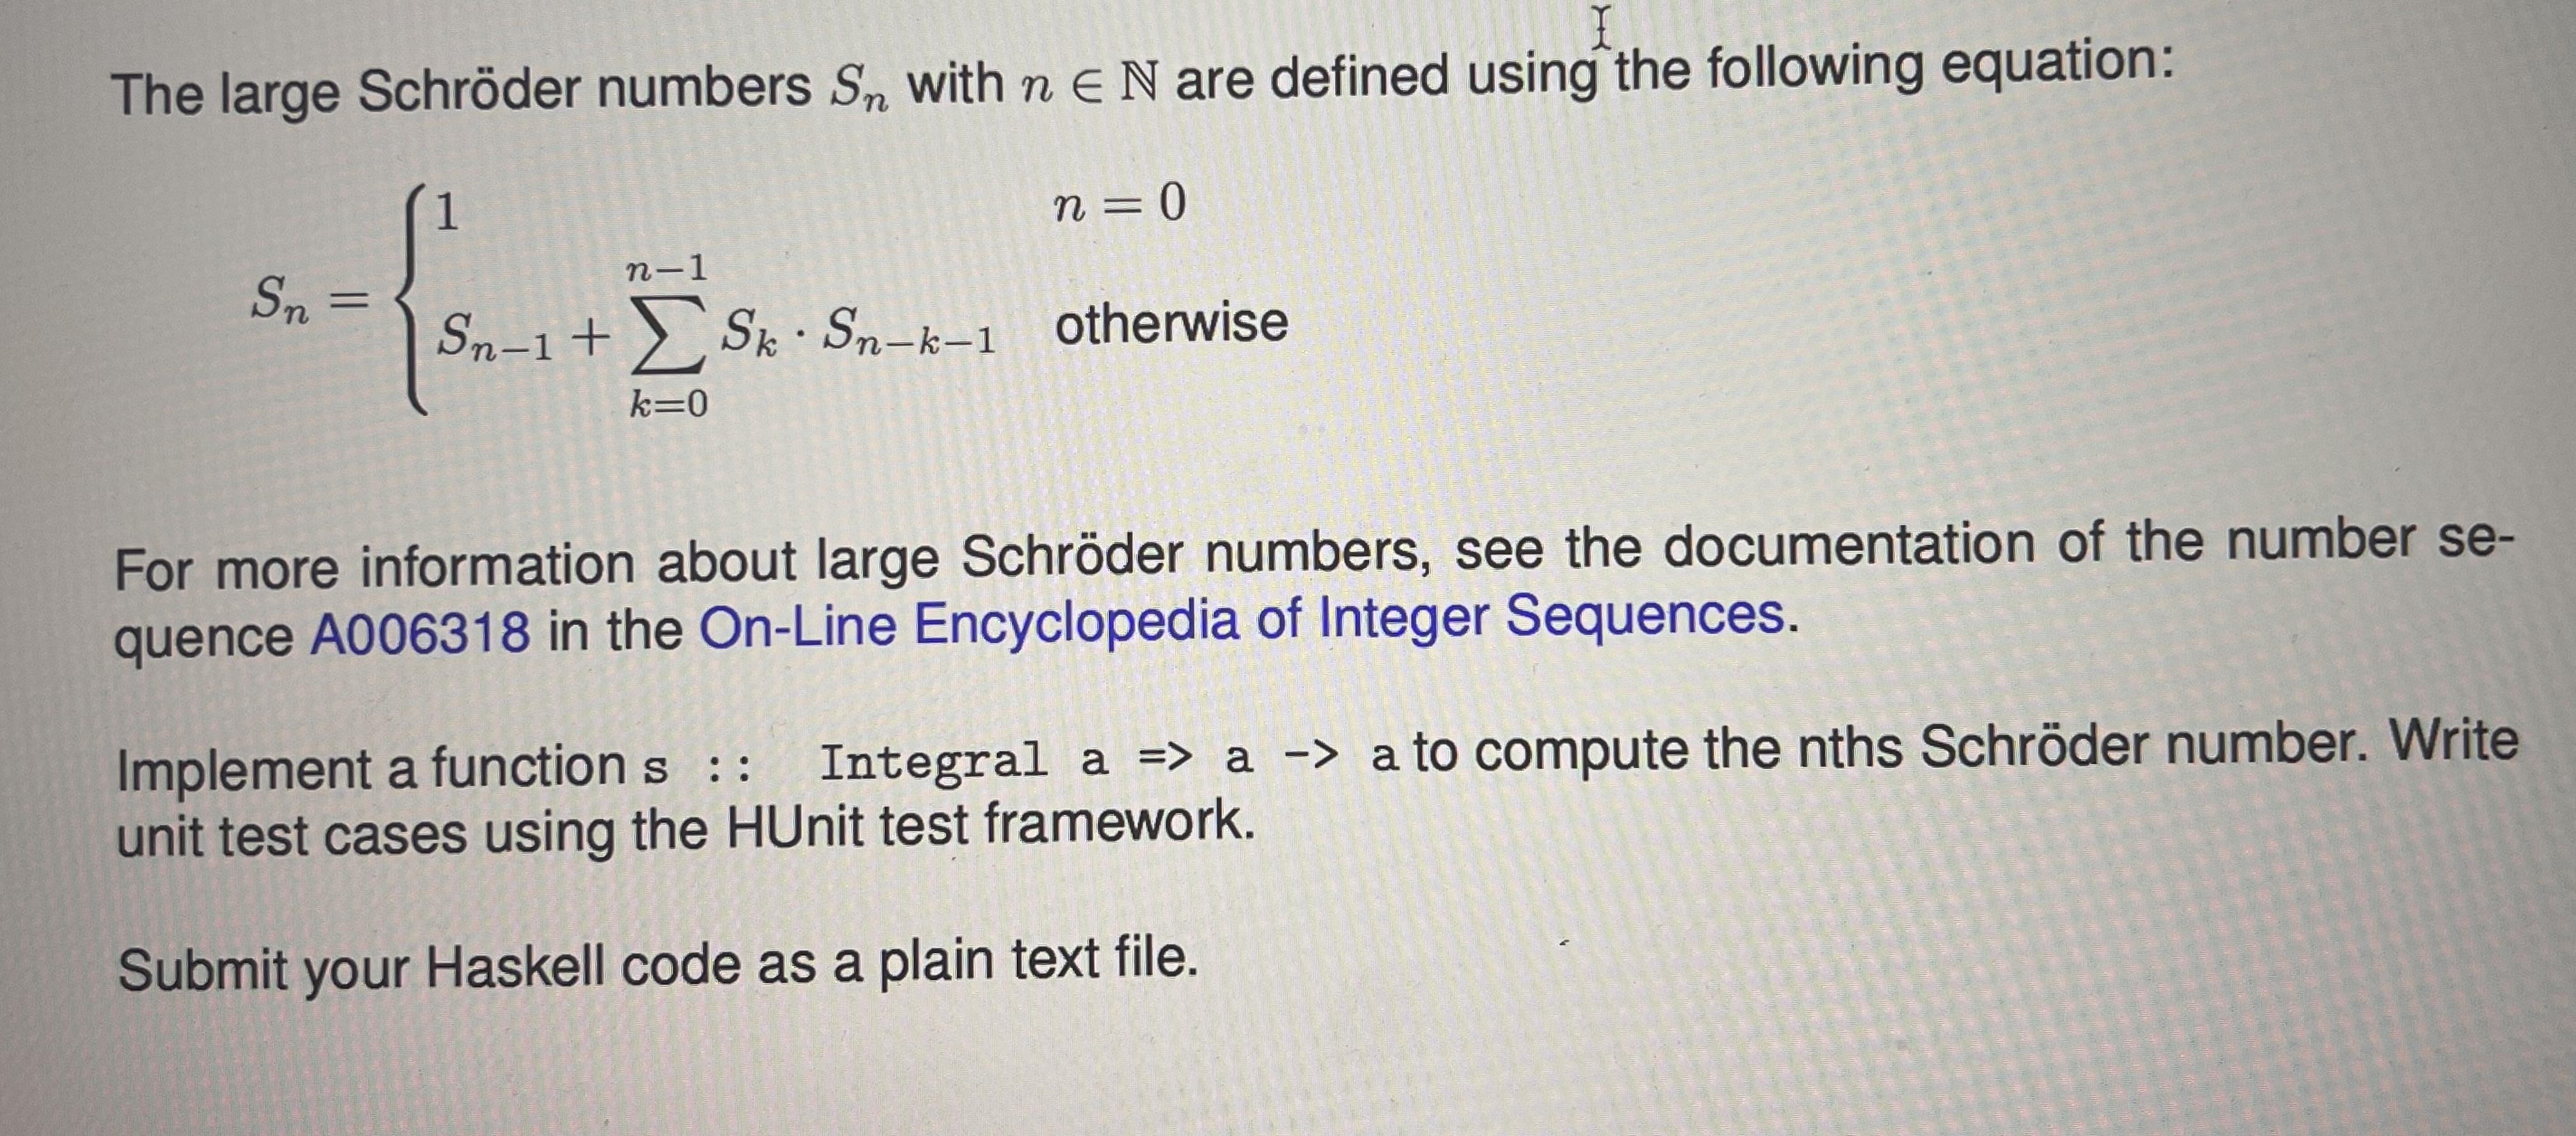 I The large Schrder numbers Sn with n E N are defined using the following equation: 1 n-1 a -> a to compute